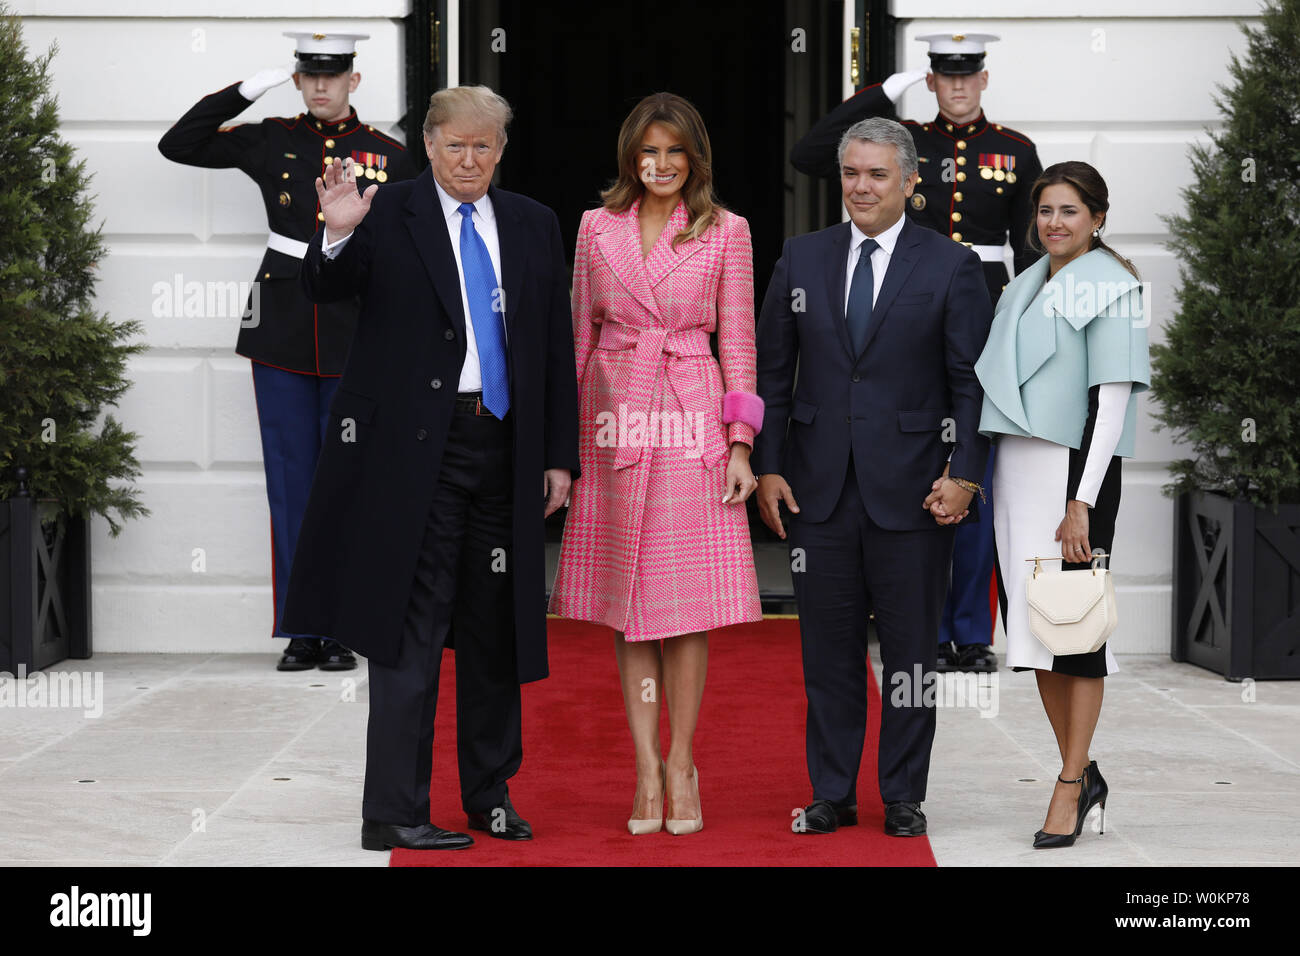 U.S. President Donald Trump (L) and First Lady Melania Trump welcome Colombian President Ivan Duque Marquez and Mrs. Ruiz Sandoval at the White House in Washington on February 13, 2019. Photo by Yuri Gripas/UPI Stock Photo